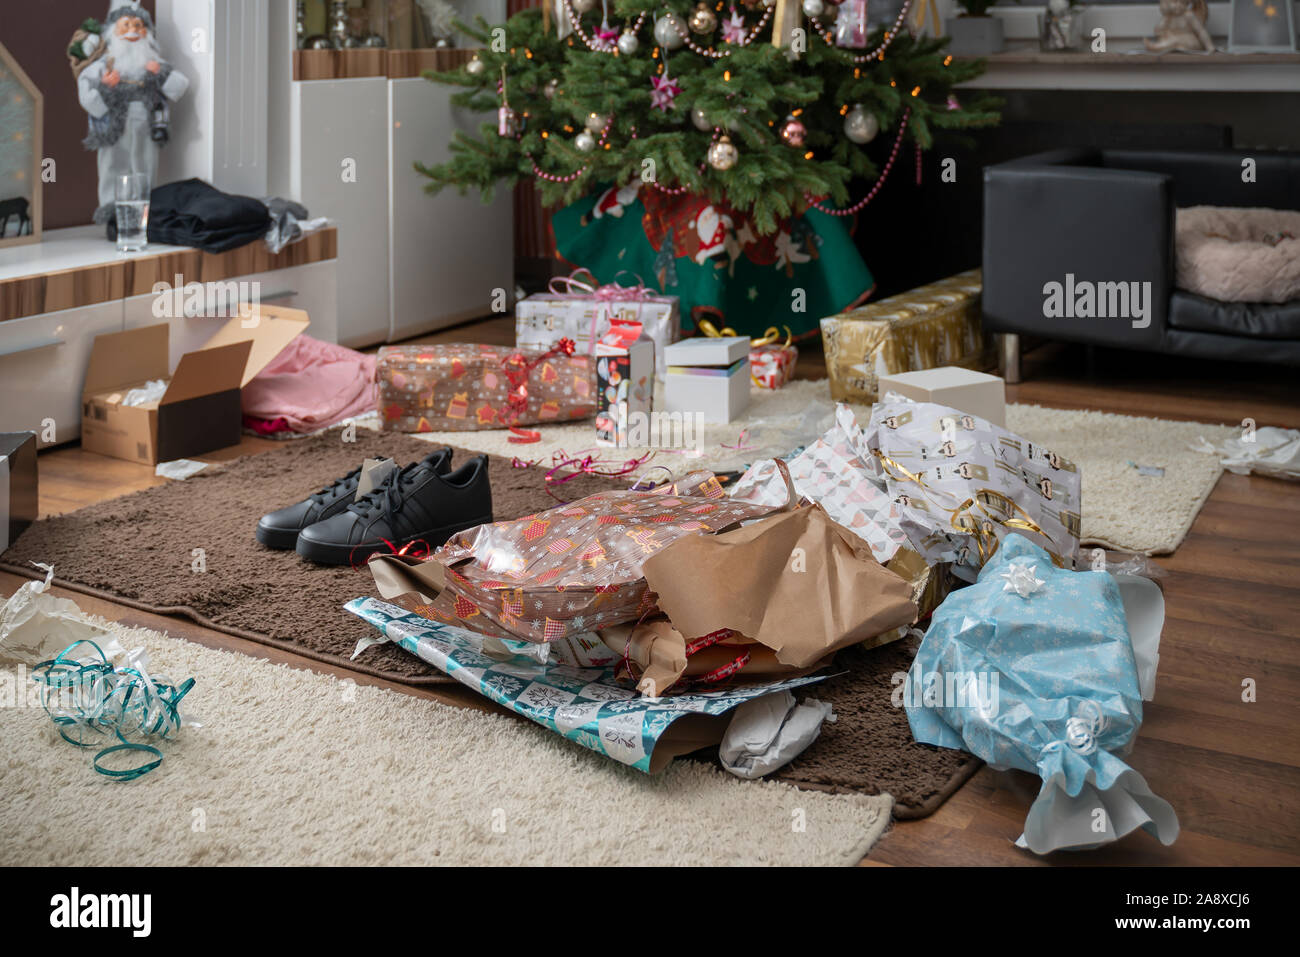 It Is Holy Night The Gifts Are Unpacked There Is A Mess Of Wrapping Paper And Boxes Throughout The Living Room Authentic Picture From Private Party Stock Photo Alamy